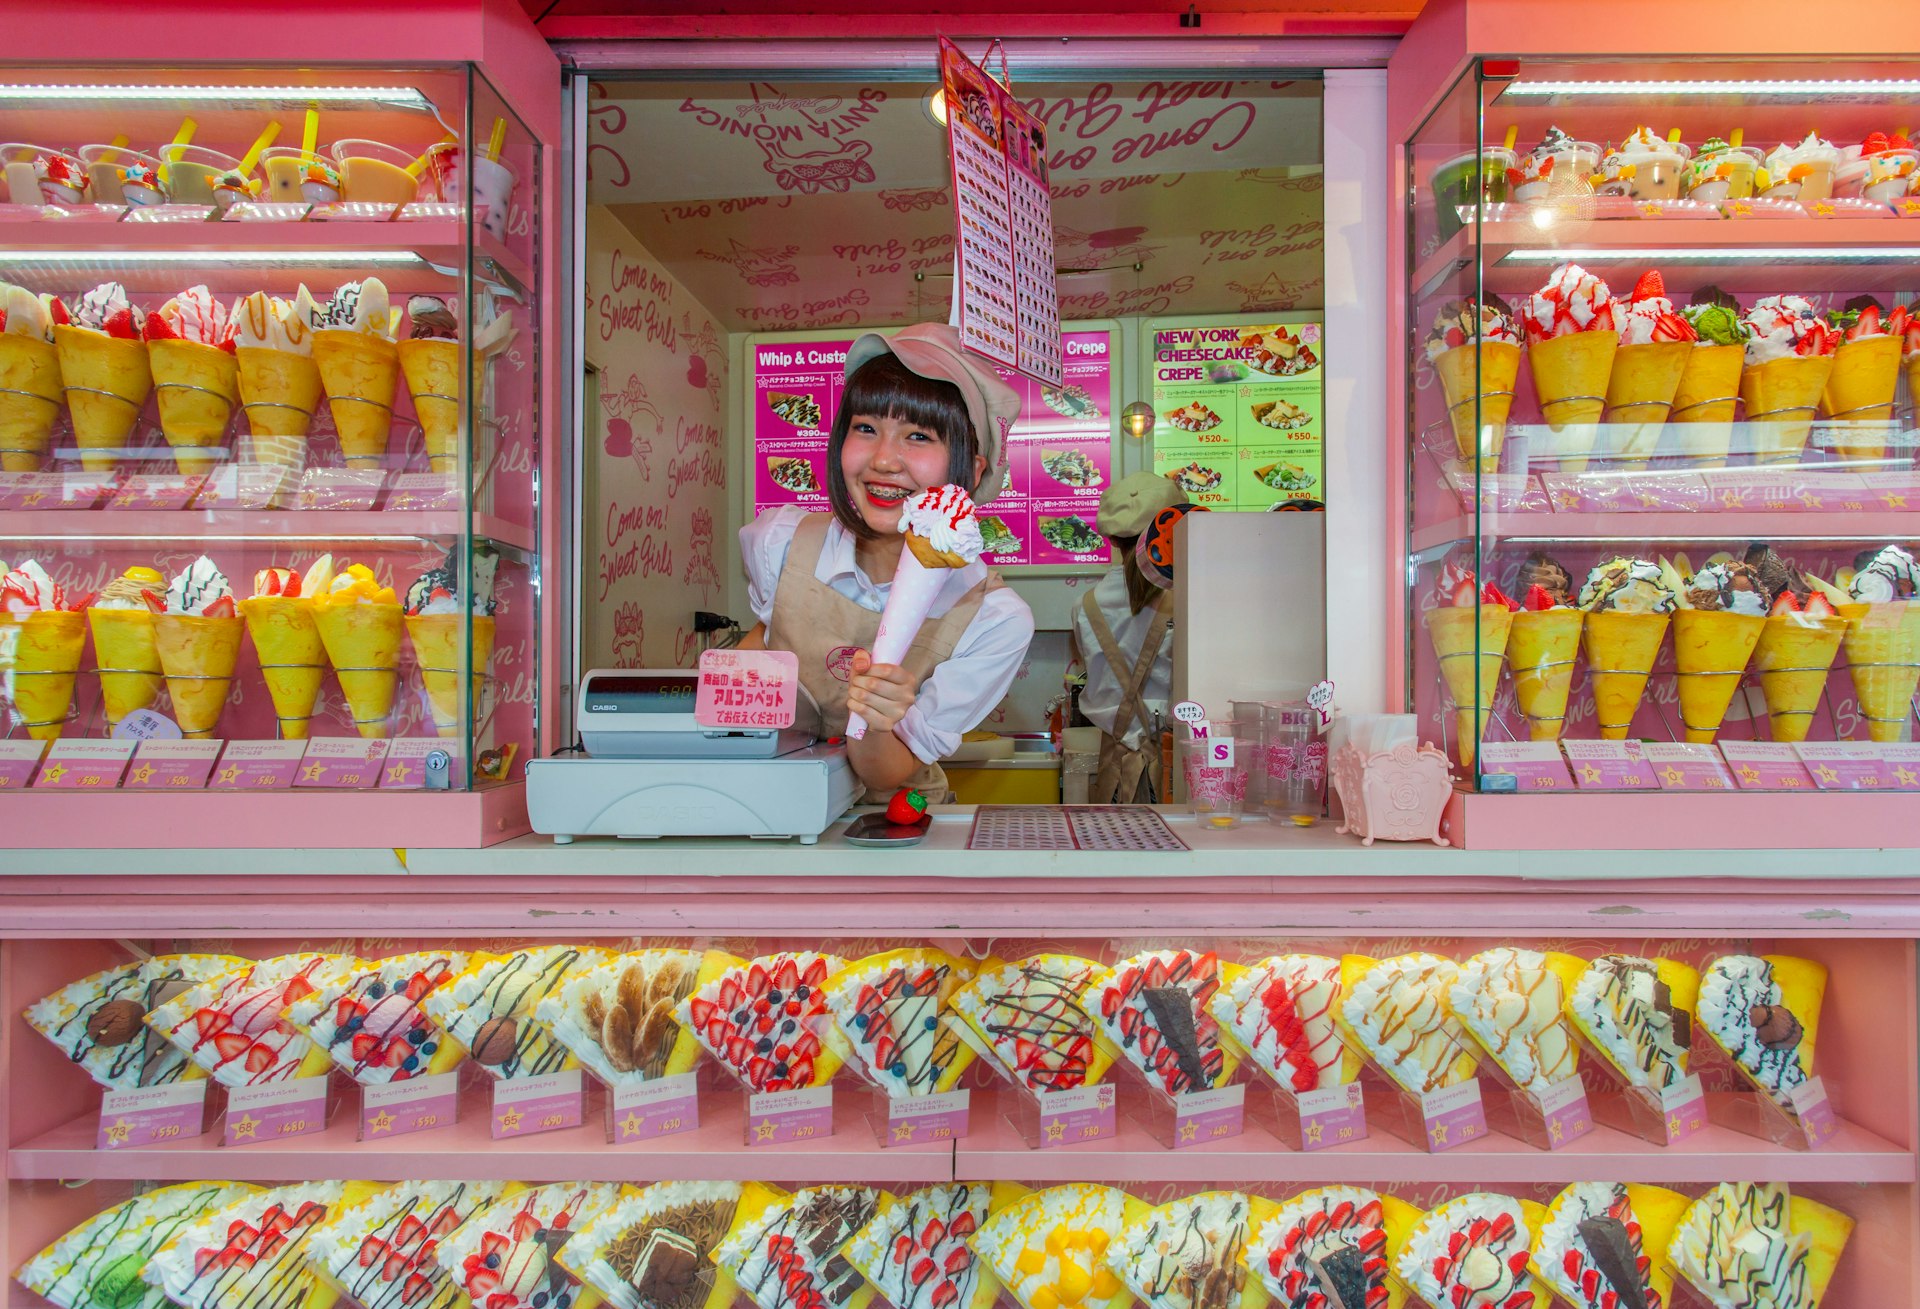 Young woman selling ice creams and crepes from a bright pink stall